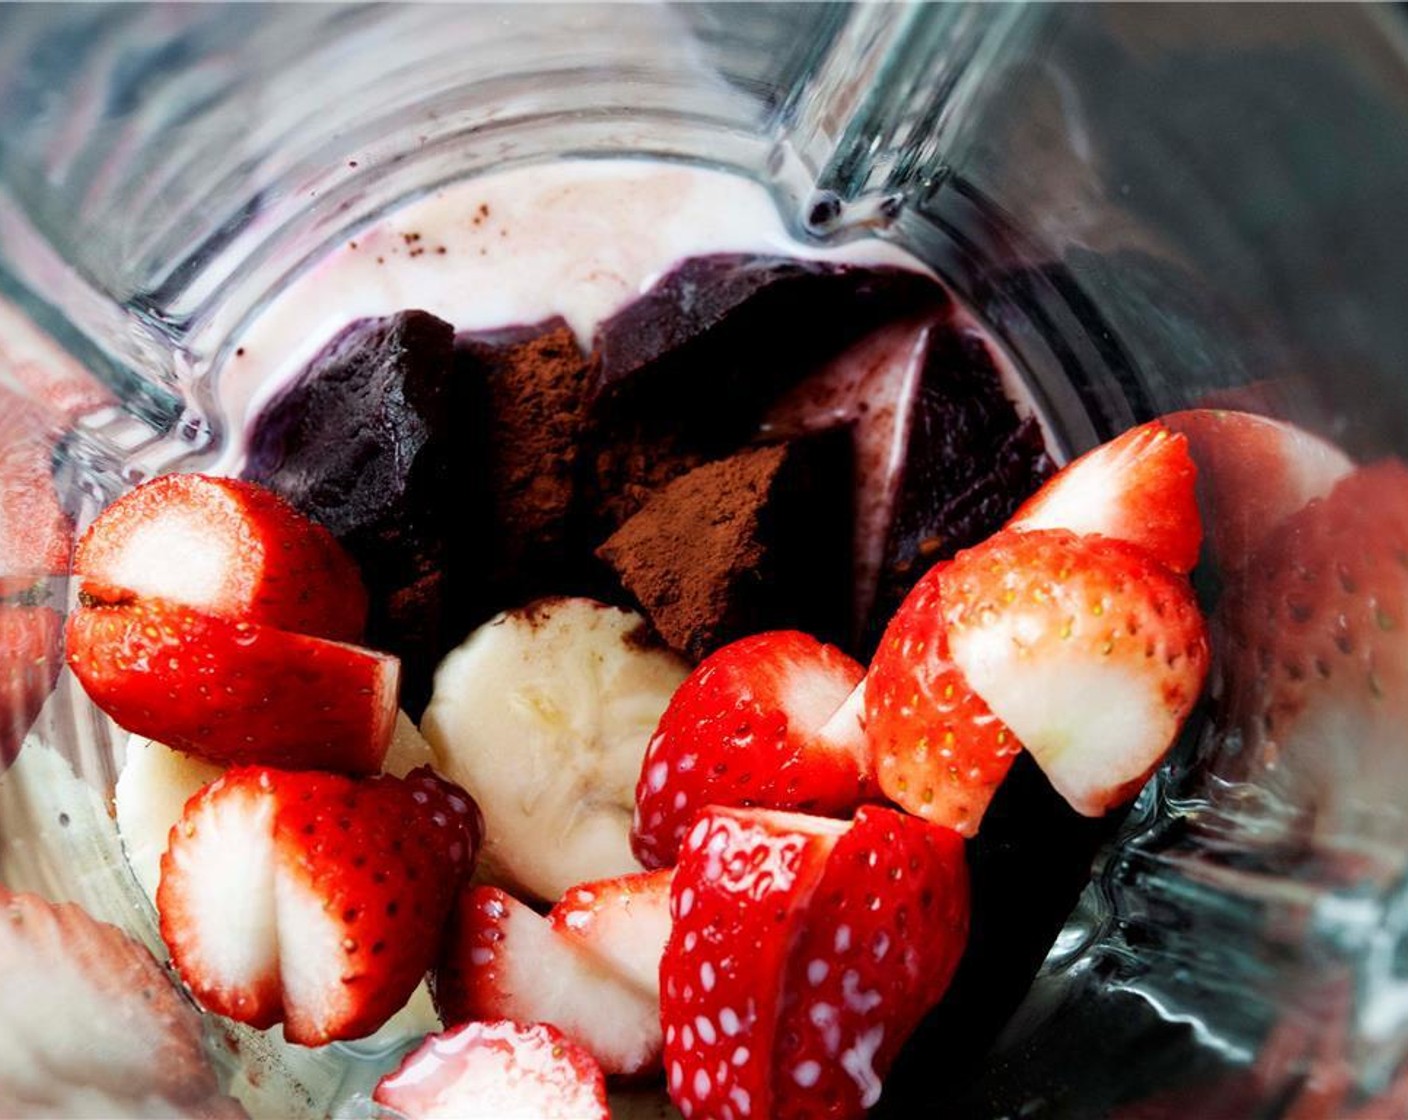 step 1 Place Beet (1), Fresh Strawberries (10), Unsweetened Almond Milk (1 cup), Agave Syrup (1 tsp), Vanilla Bean Paste (1/2 tsp) and Raw Cocoa Powder (1 tsp) in the blender.